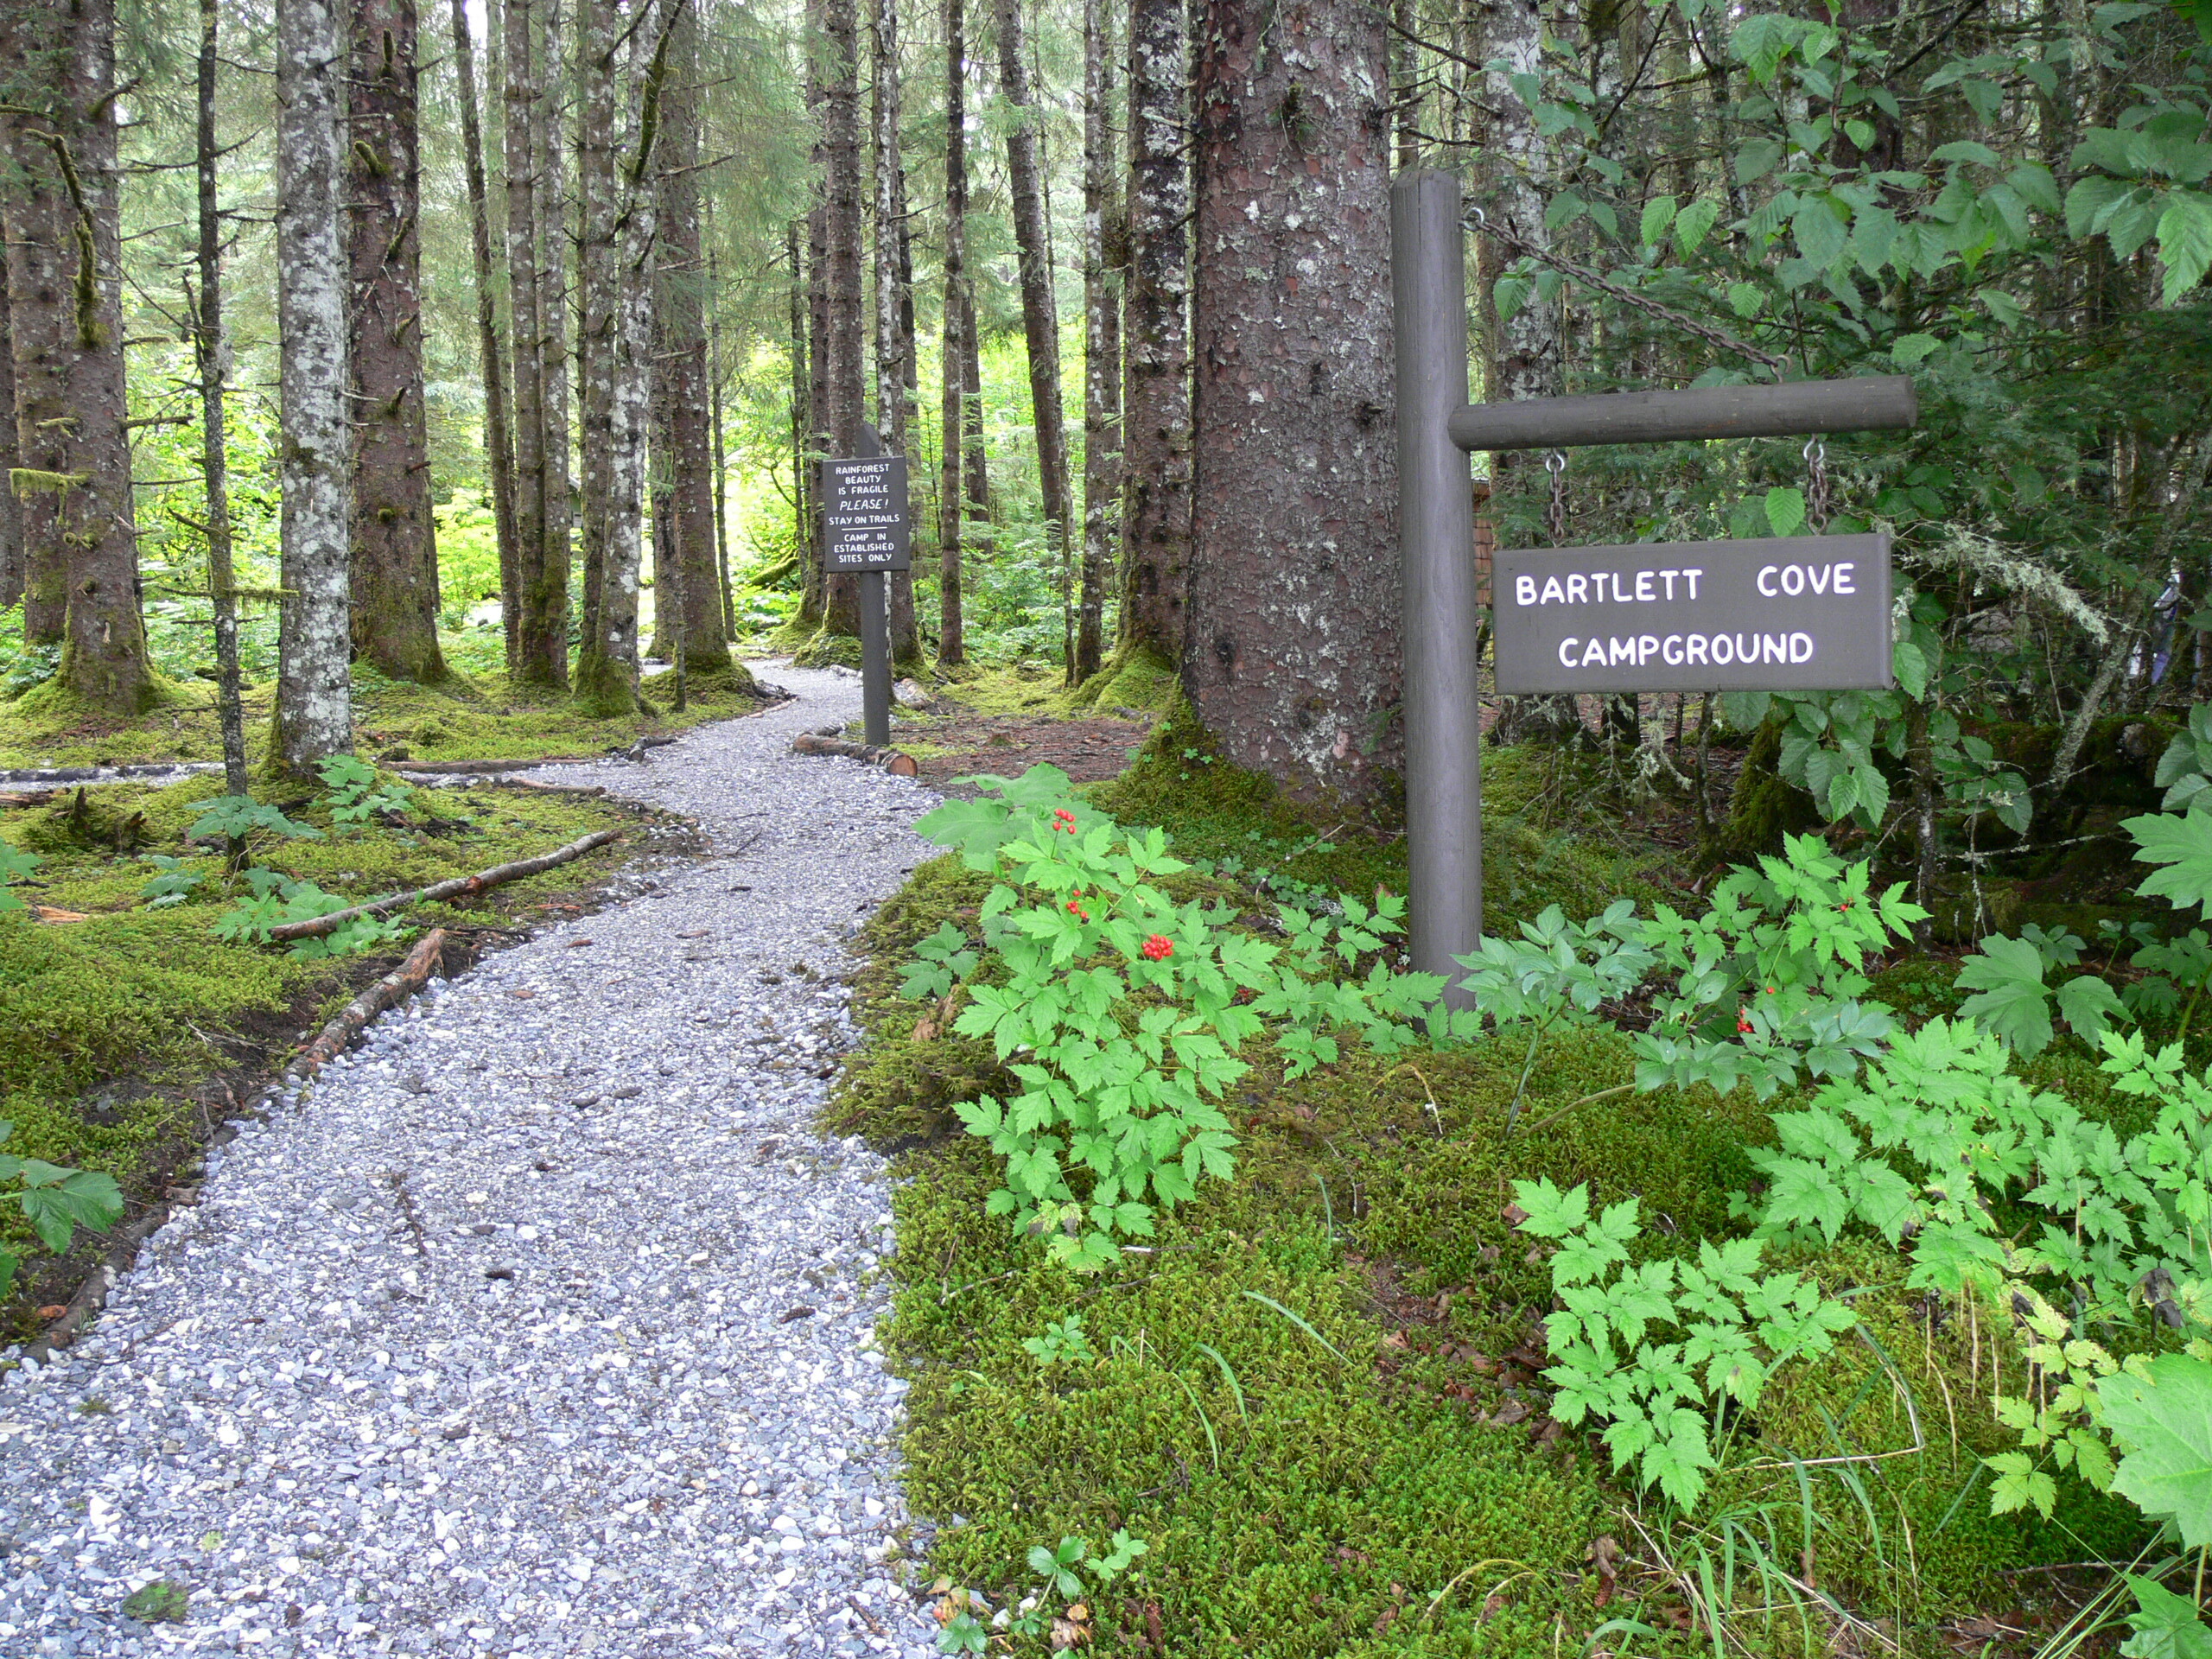 Gravel trail leading into a mossy forest. A sign reading "Bartlett Cover Campground" can be seen to the right. 